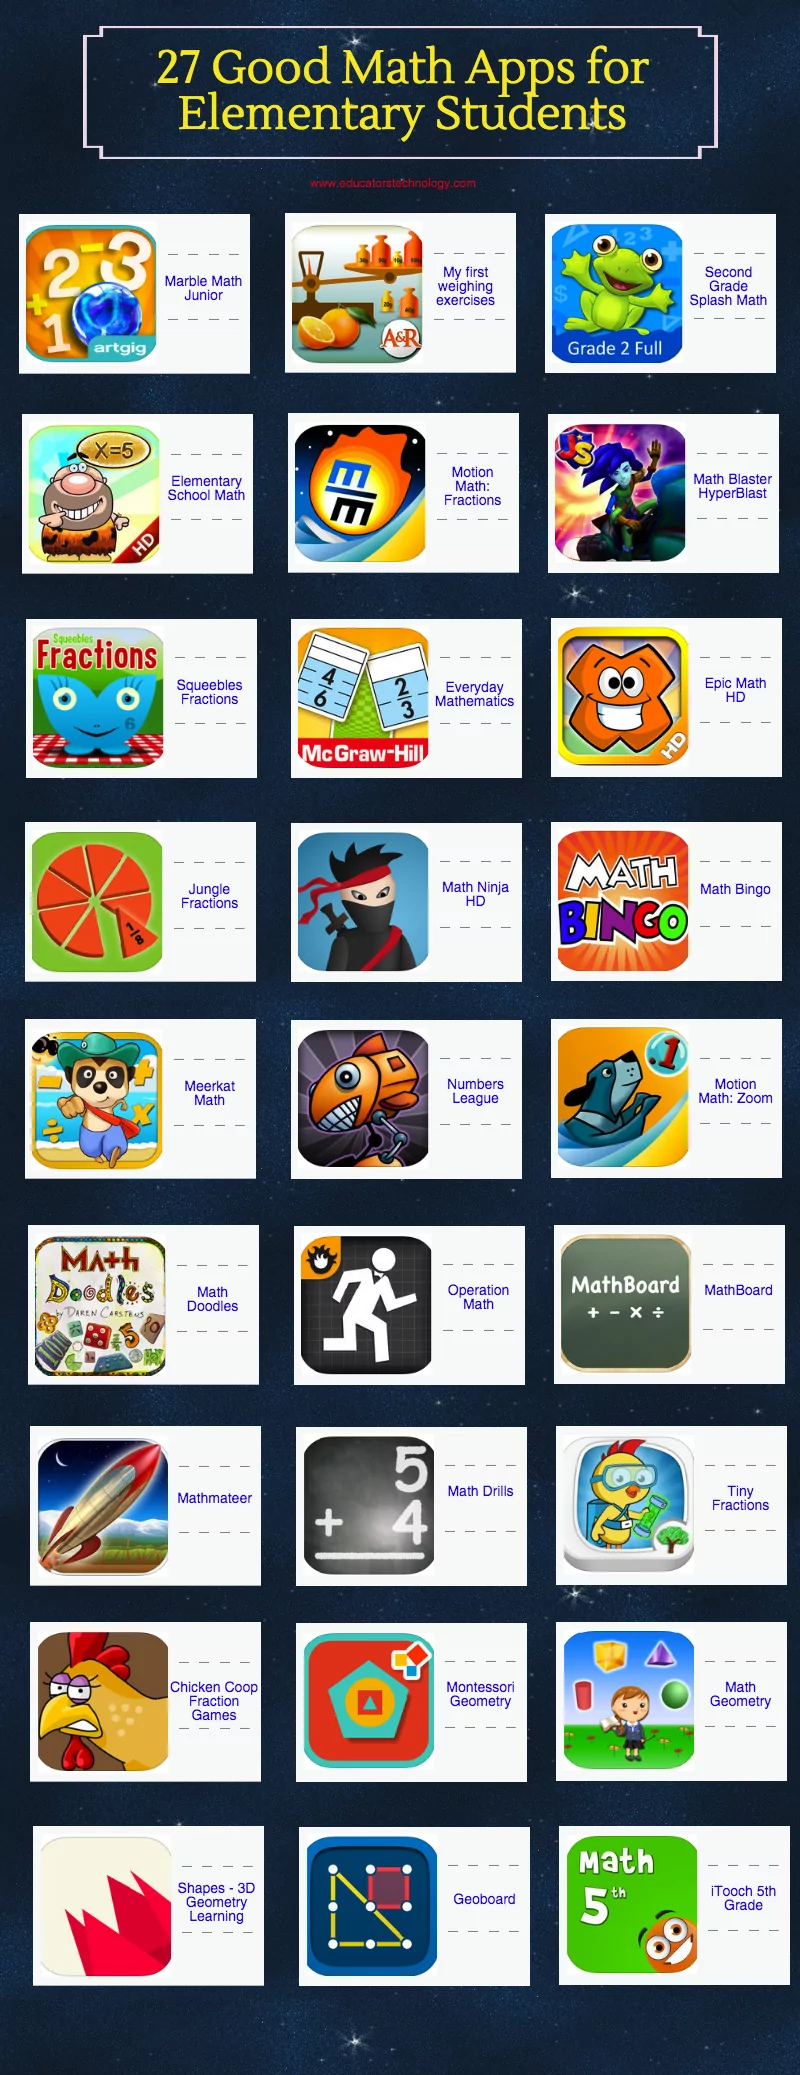 27 Good Math Apps for Elementary Students